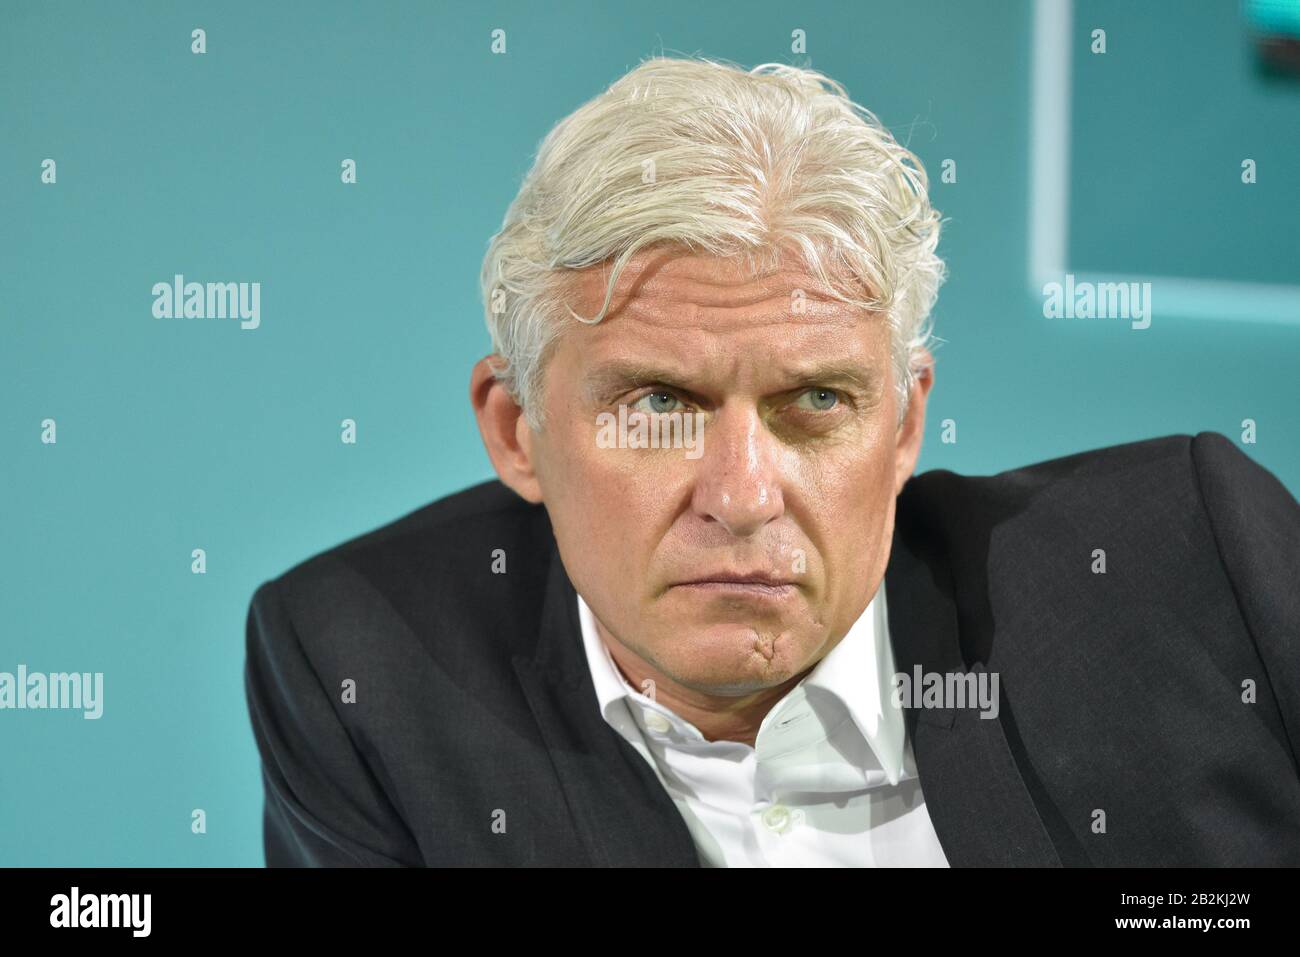 Saint Petersburg, Russia - July 13 2017.  Oleg Tinkov, chairman of the Board of Directors at Tinkoff Bank, at the 2017 International Financial Congres Stock Photo